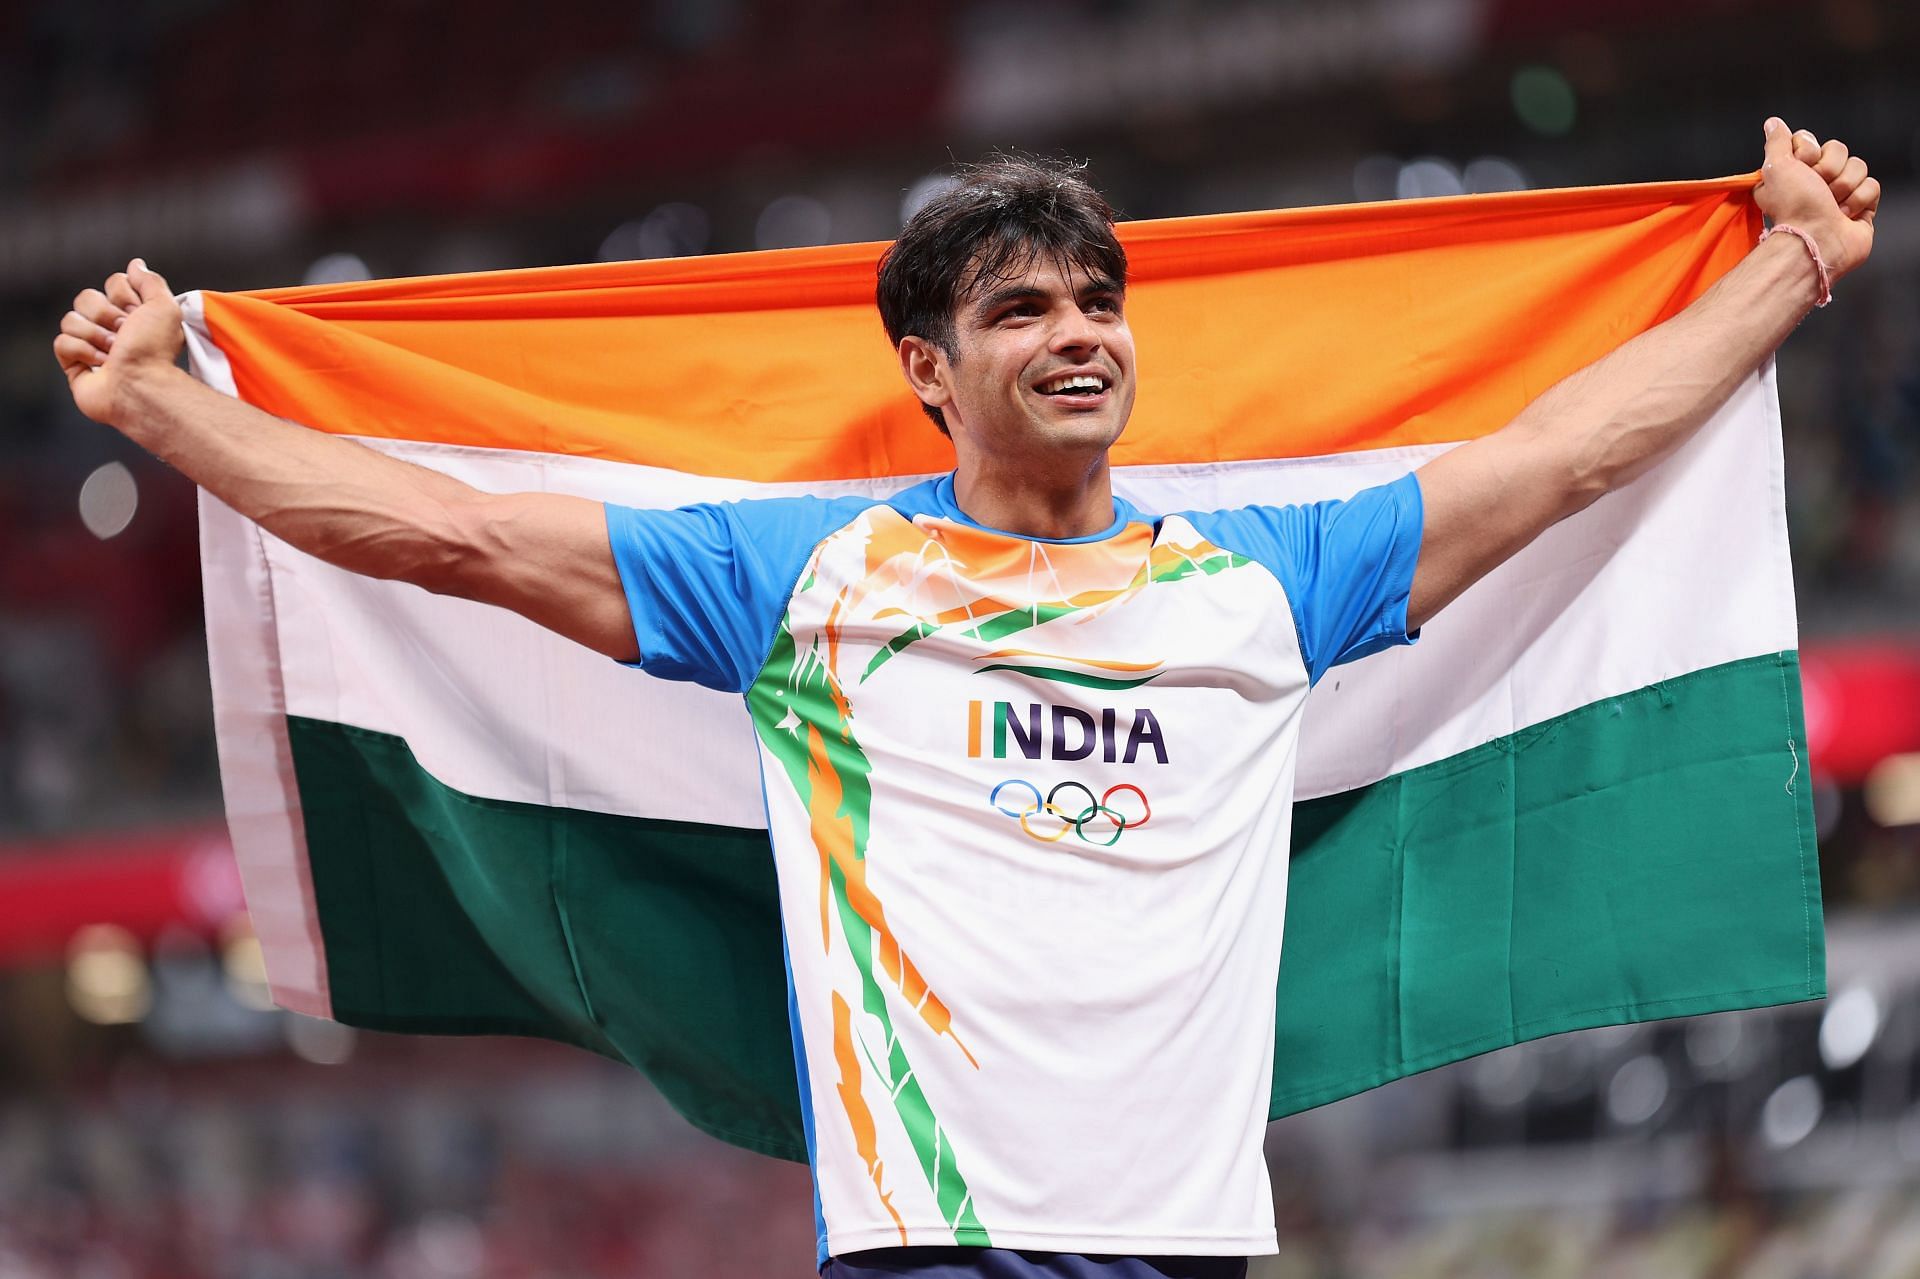 Neeraj Chopra celebrates winning the gold medal at the Tokyo Olympics (Image courtesy: Getty Images)